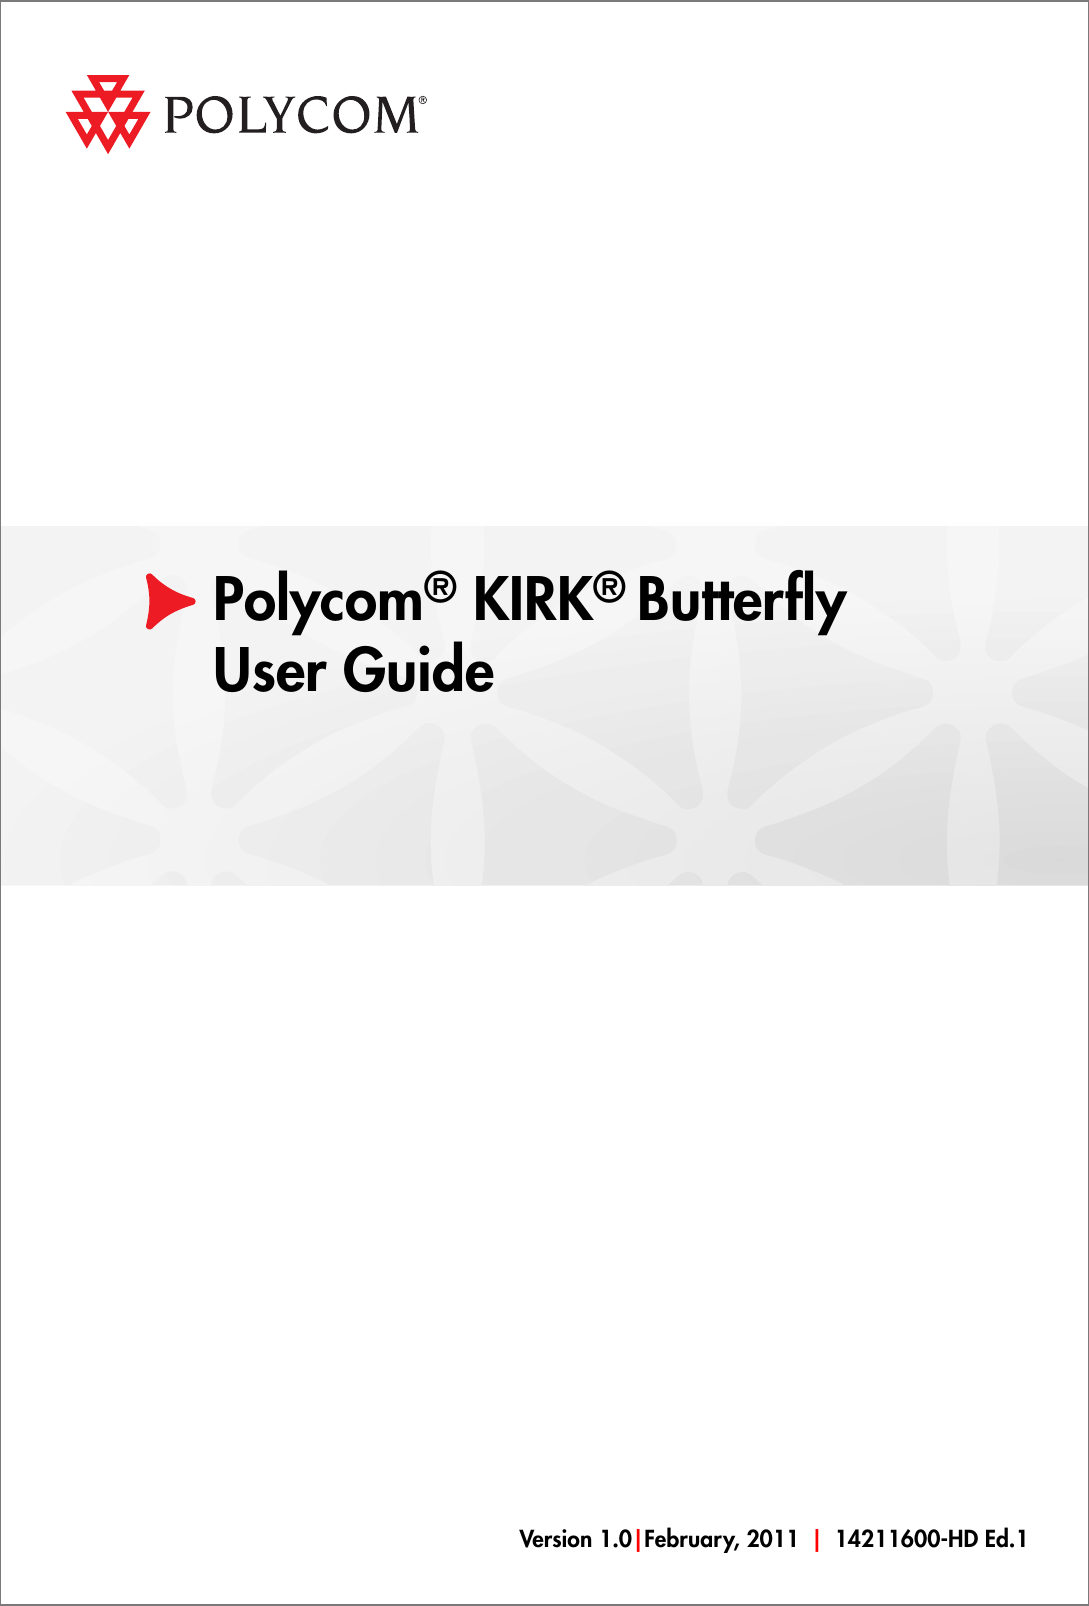 Version 1.0|February, 2011 |14211600-HD Ed.1Polycom® KIRK® Butterfly User Guide